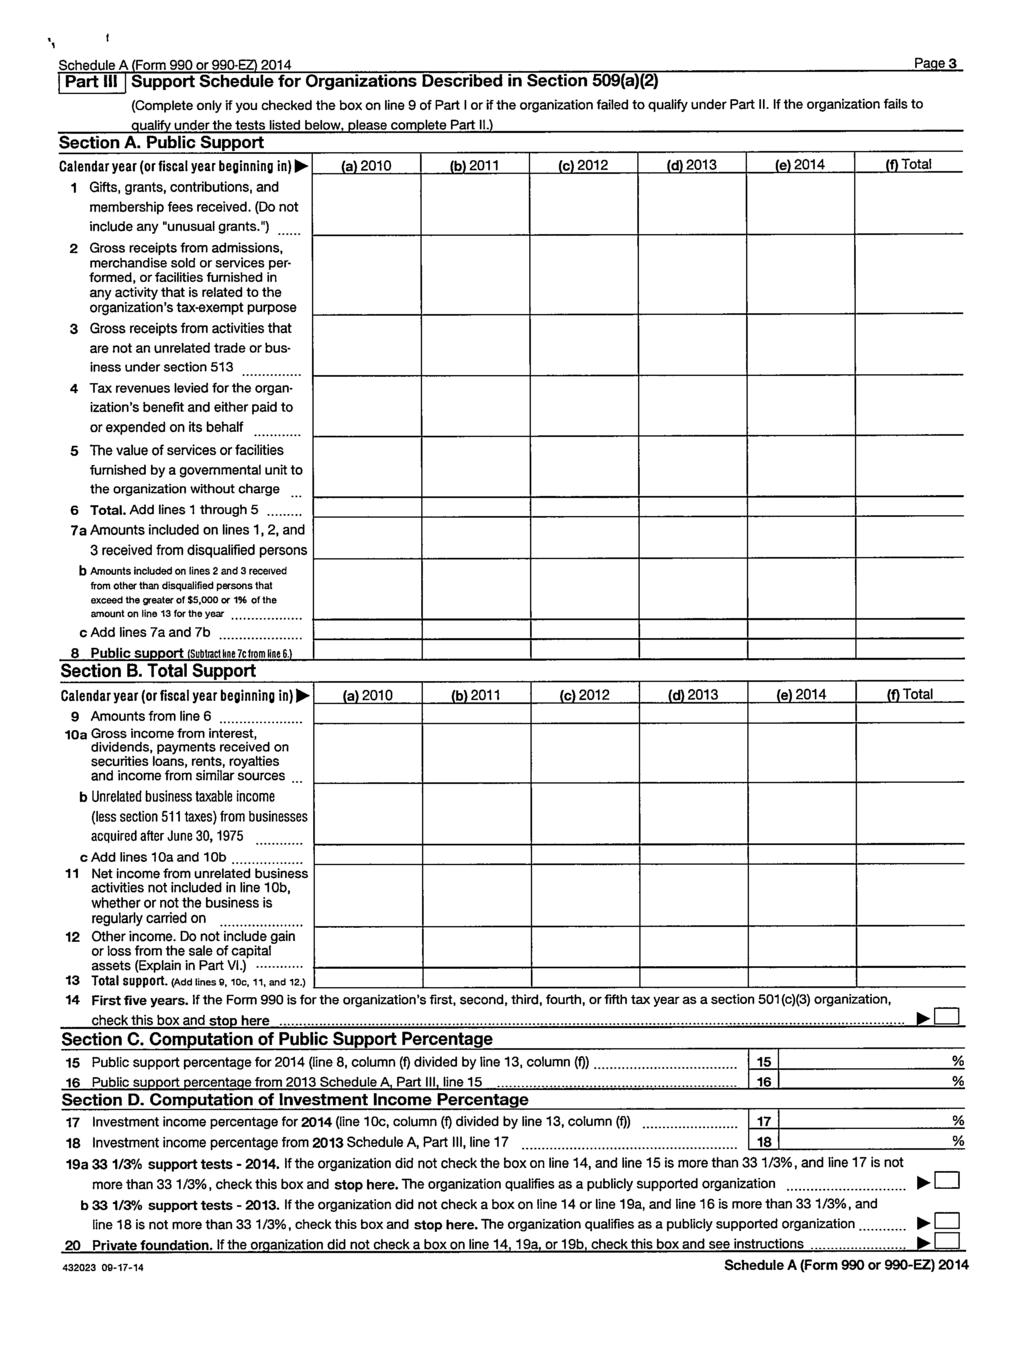 Schedule A (Form 990 or 990-EZ) 2014 Page 3 Part Ill Support Schedule for Organizations Described in Section 509(a)(2) (Complete only if you checked the box on line 9 of Part I or if the organization